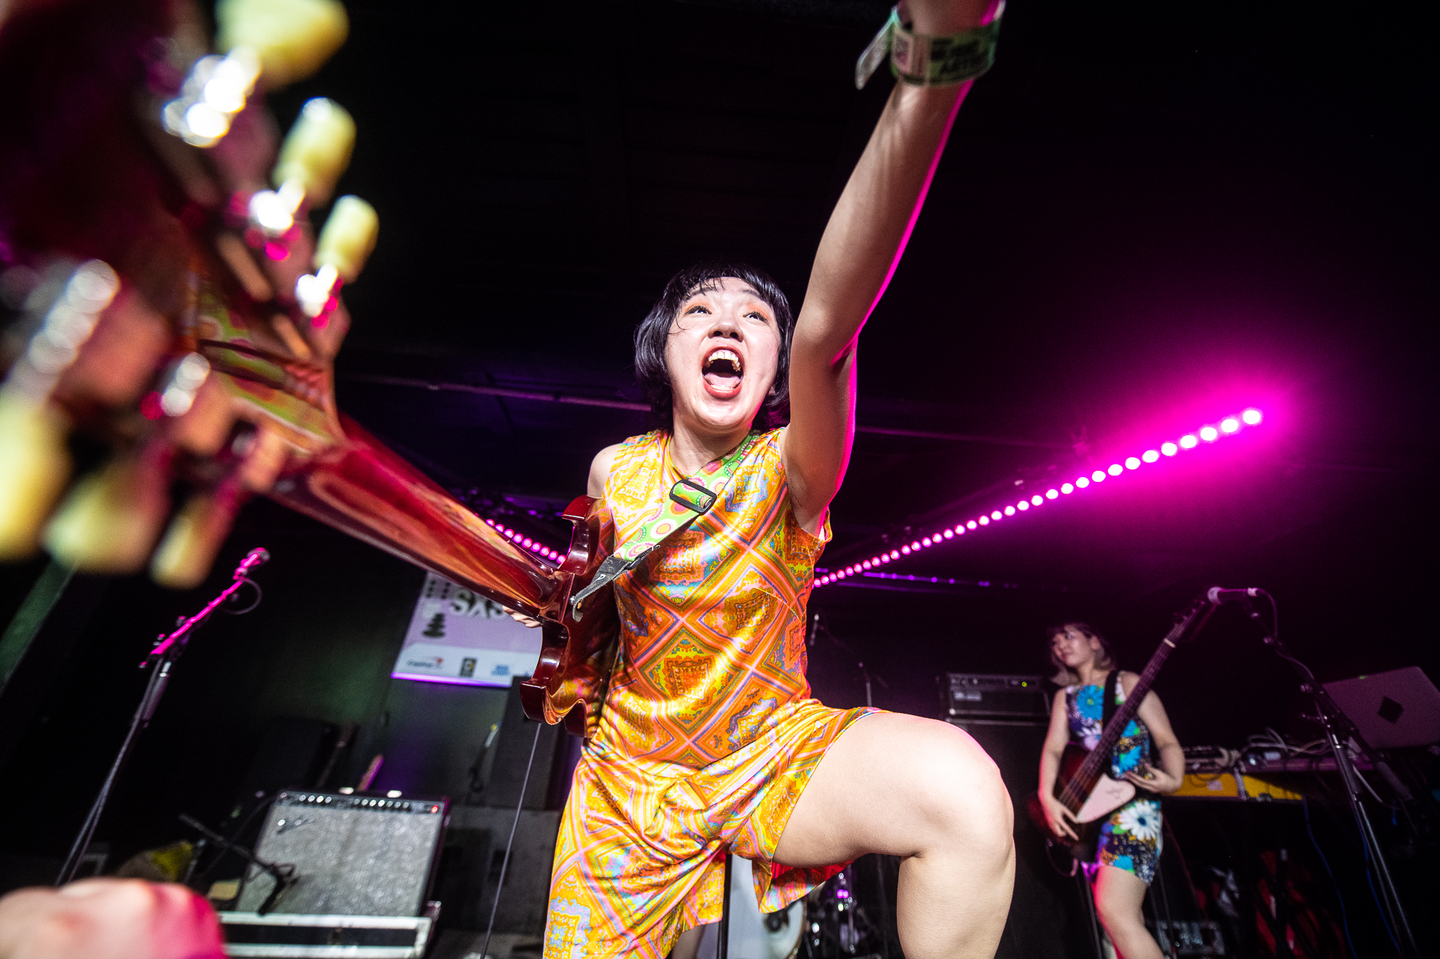 Otoboke Beaver at the Music Opening Party presented by Music.com at The Main.